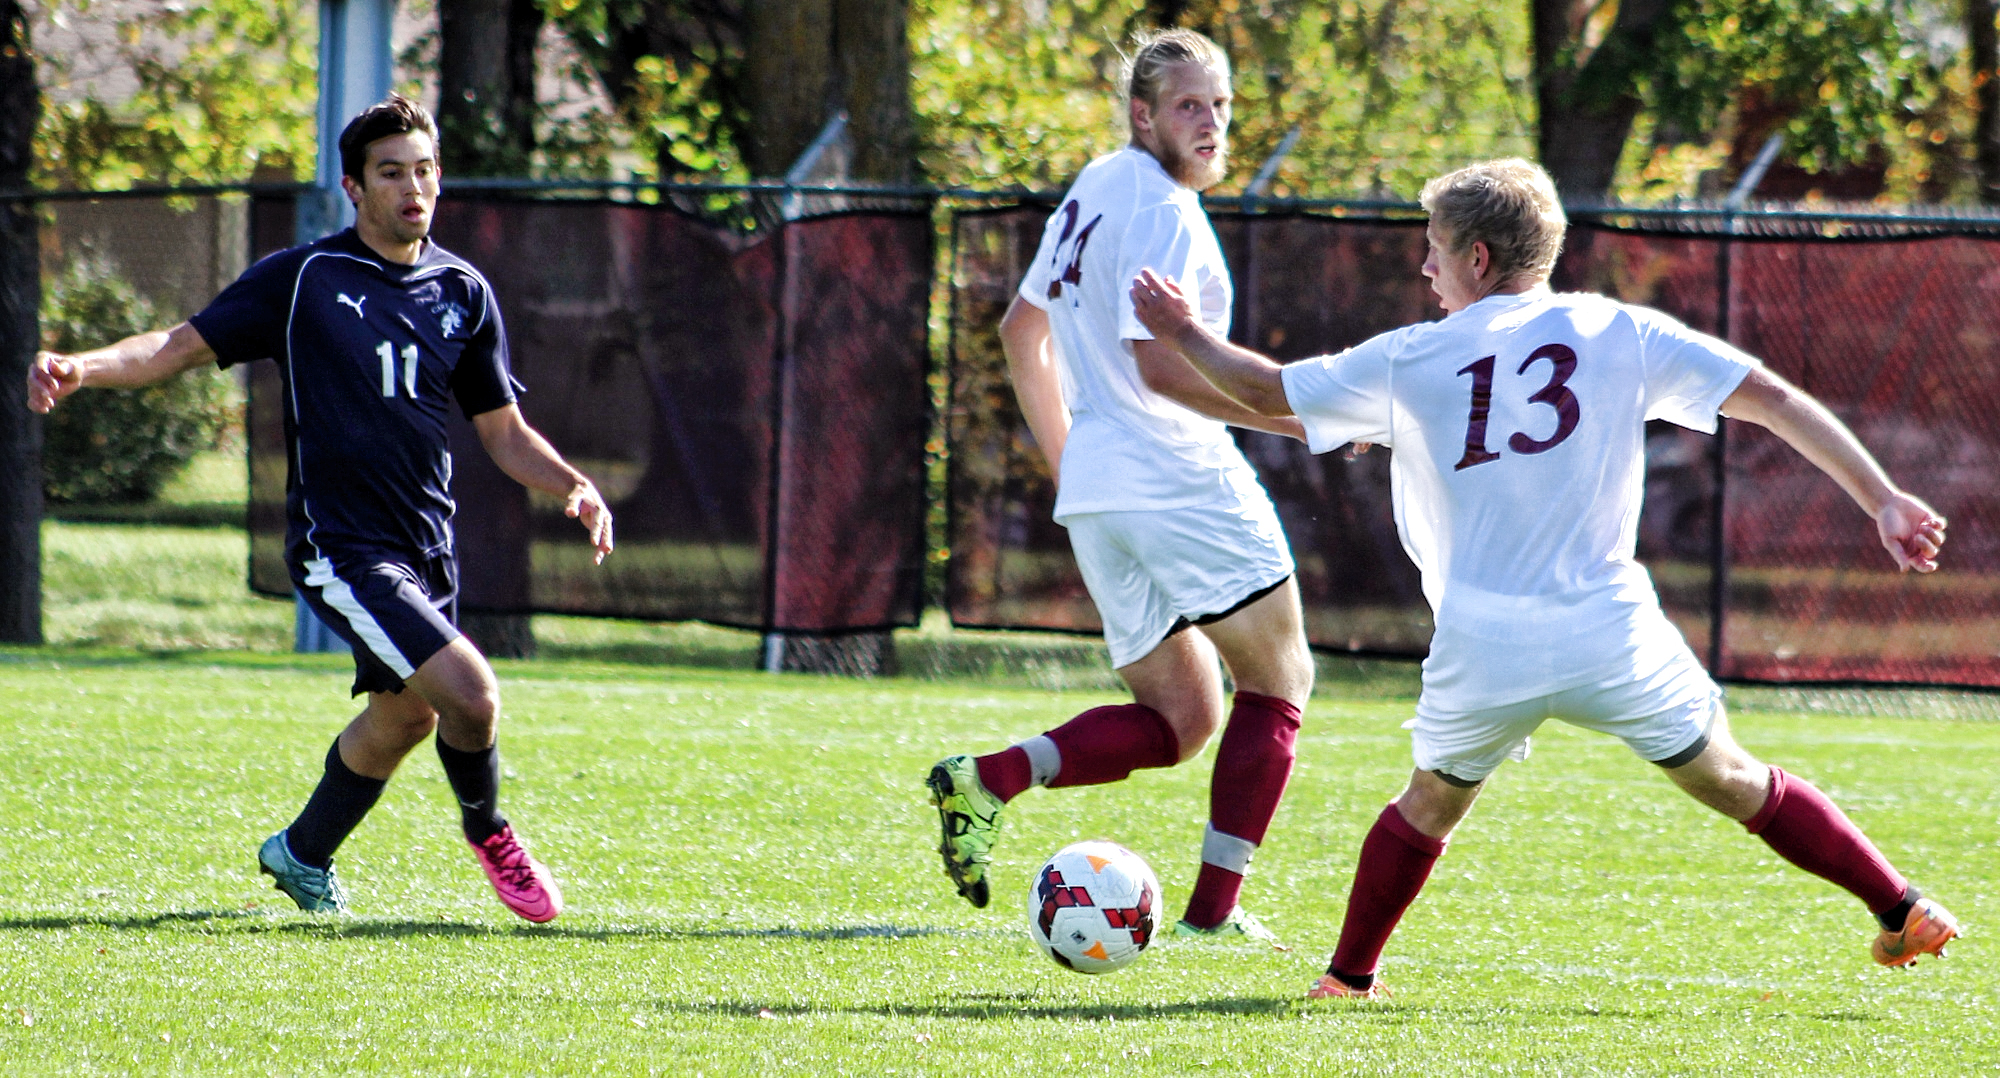 Sophomore defender Tony Morrell goes for a loose ball during the Cobbers' game with Carleton.